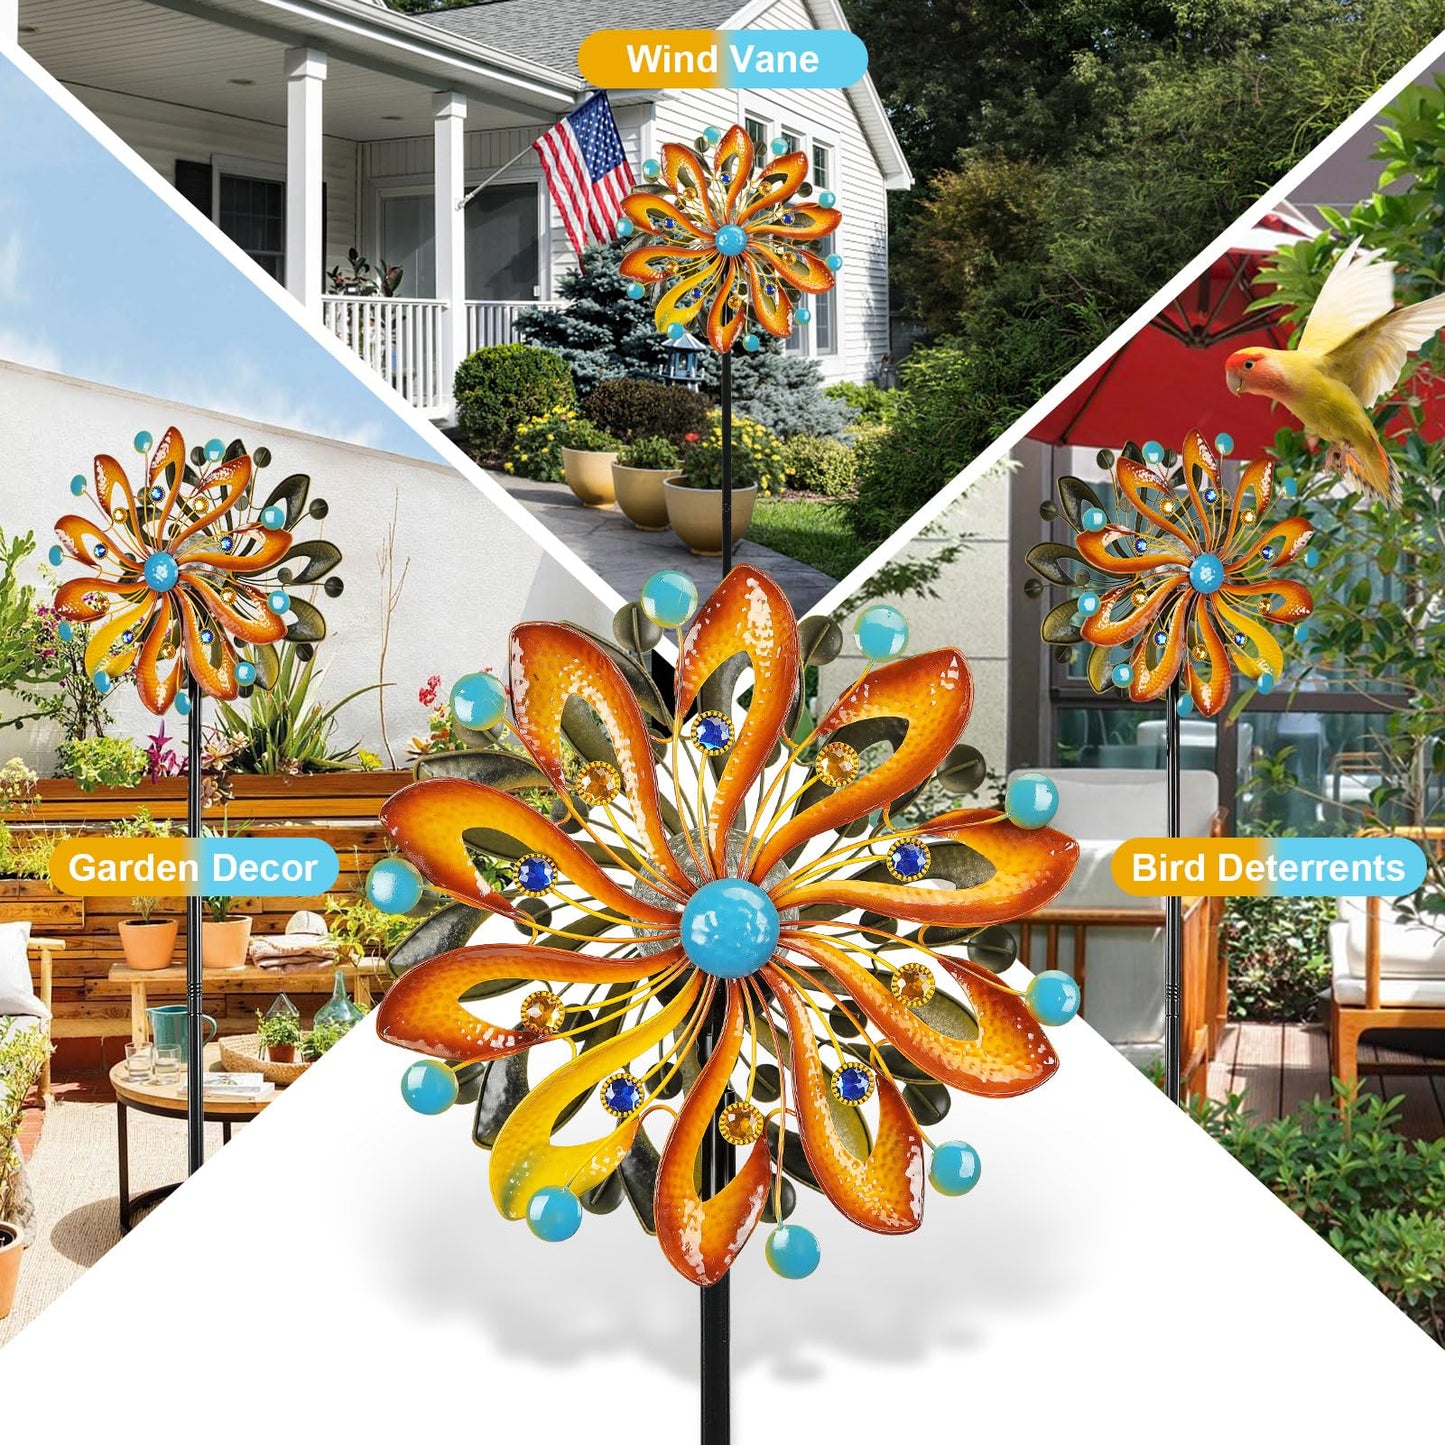 Wind Spinners for Yard and Garden-Wind Sculptures & Spinners 75 in Garden Kinetic Art with Solar Powered Multi-Color Glass Ball Light for Yard Garden Backyard Lawn Decorations